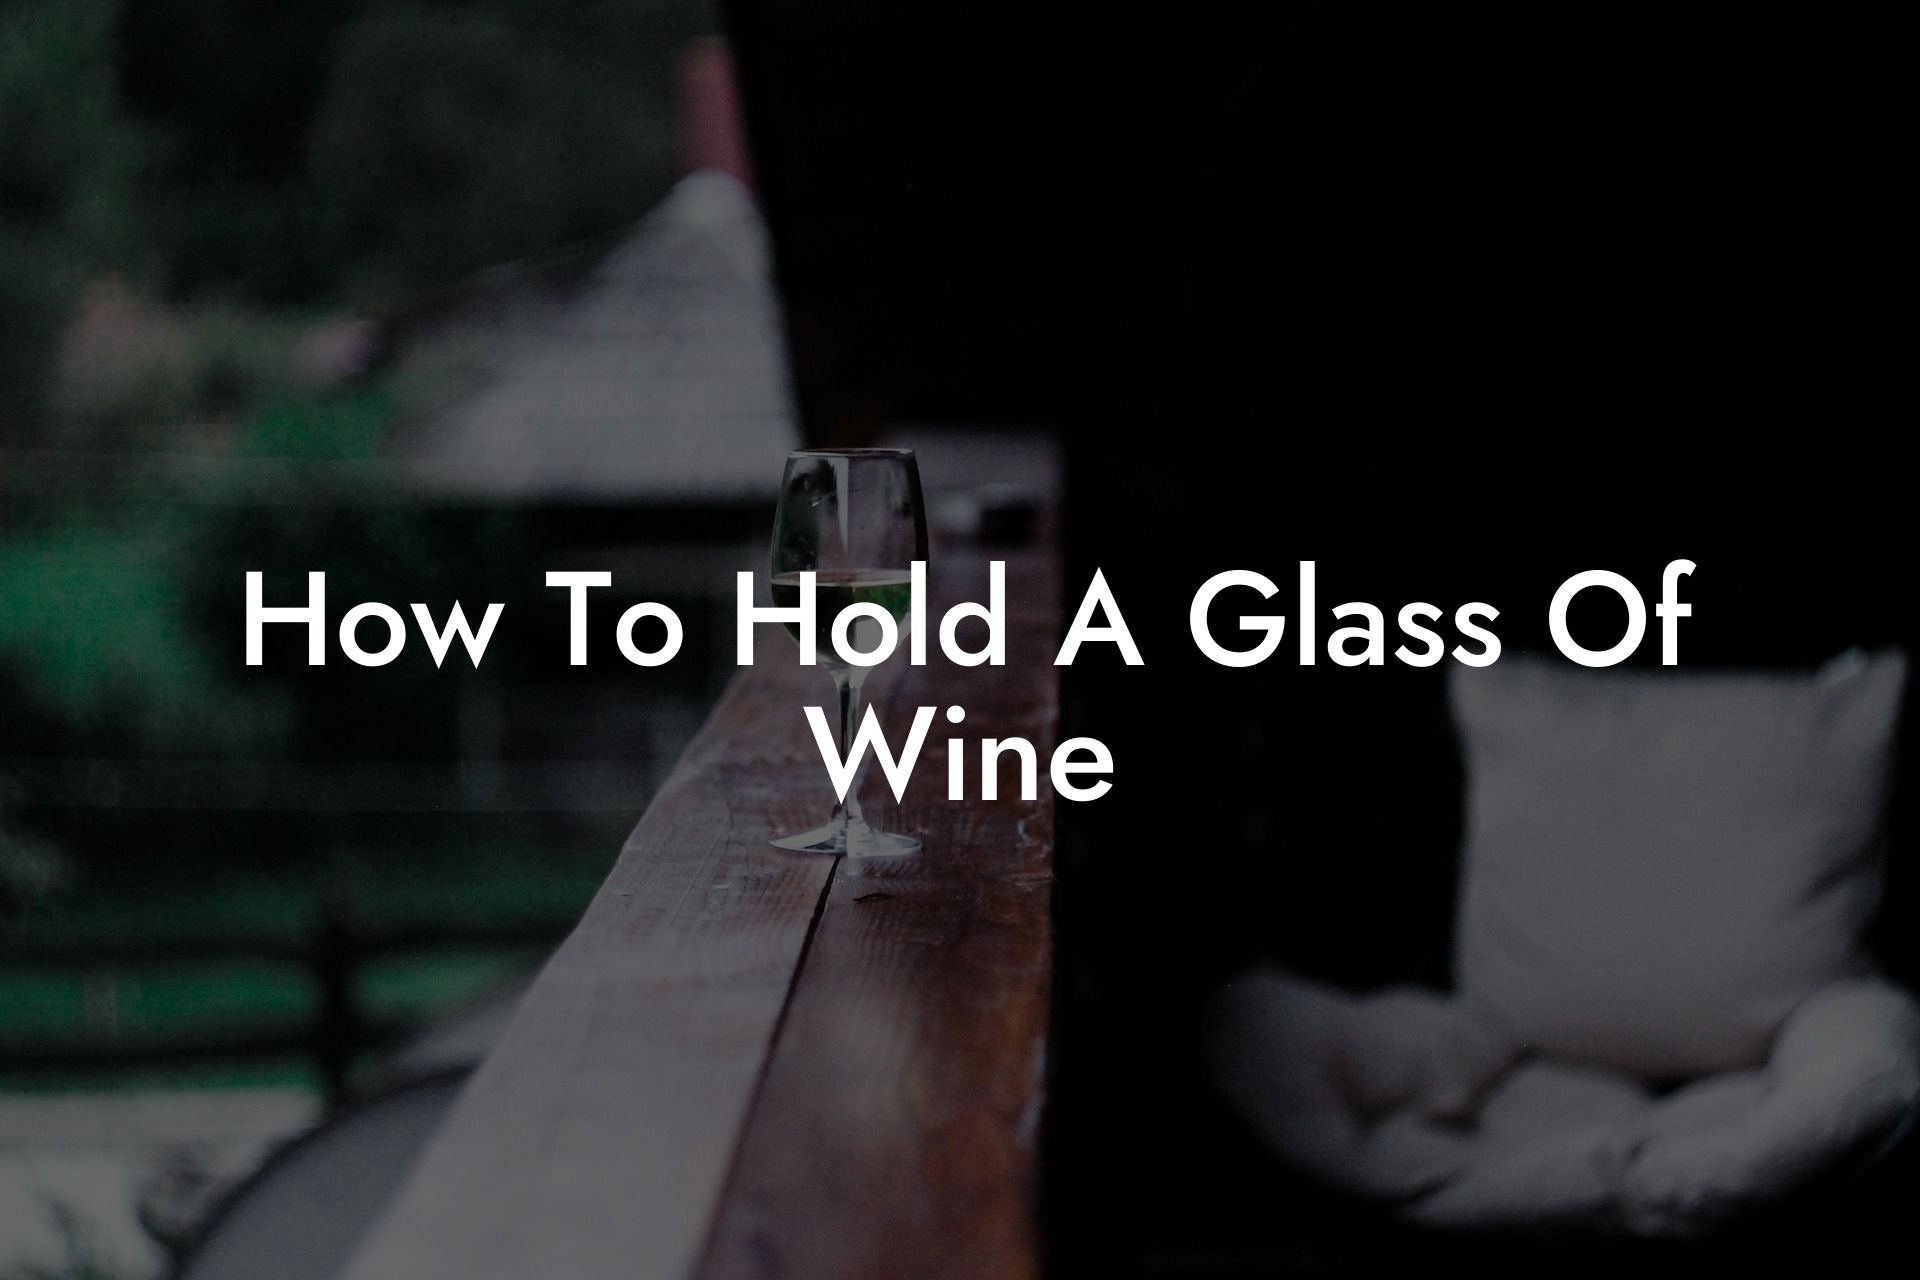 How To Hold A Glass Of Wine